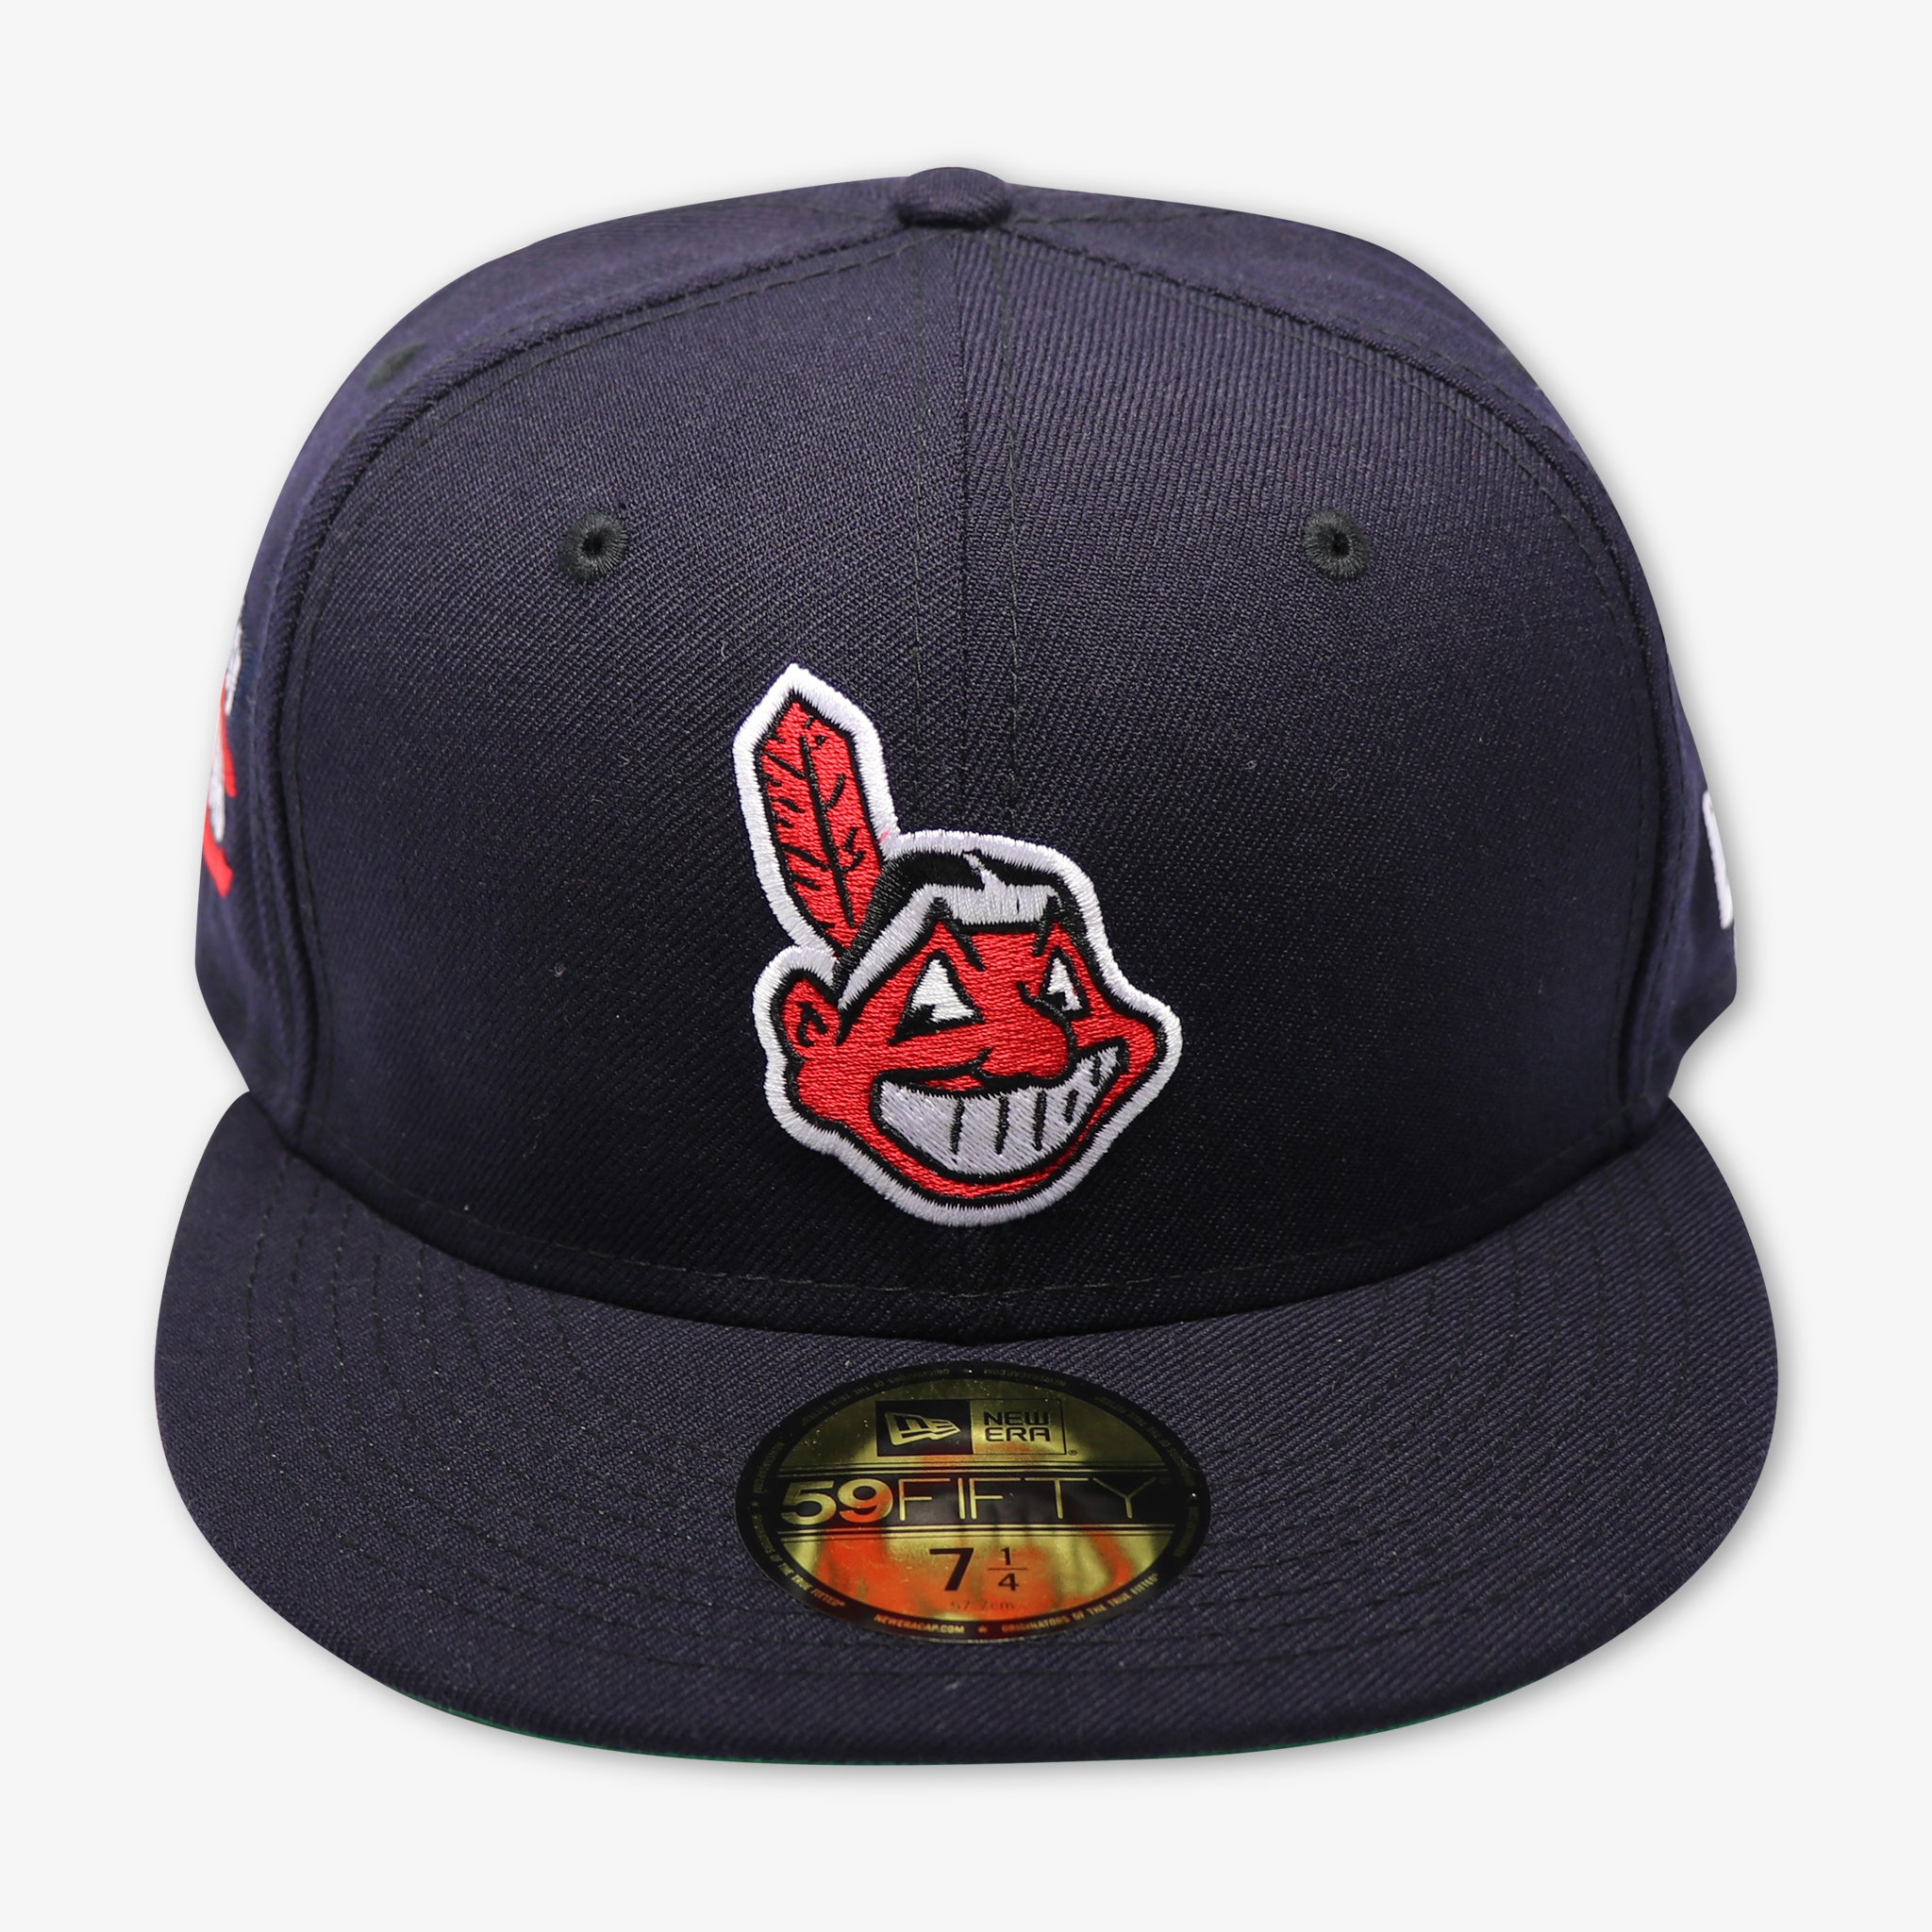 CLEVELAND INDIANS (1948 INDIANS) NEW ERA 59FIFTY FITTED (GREEN BOTTOM)